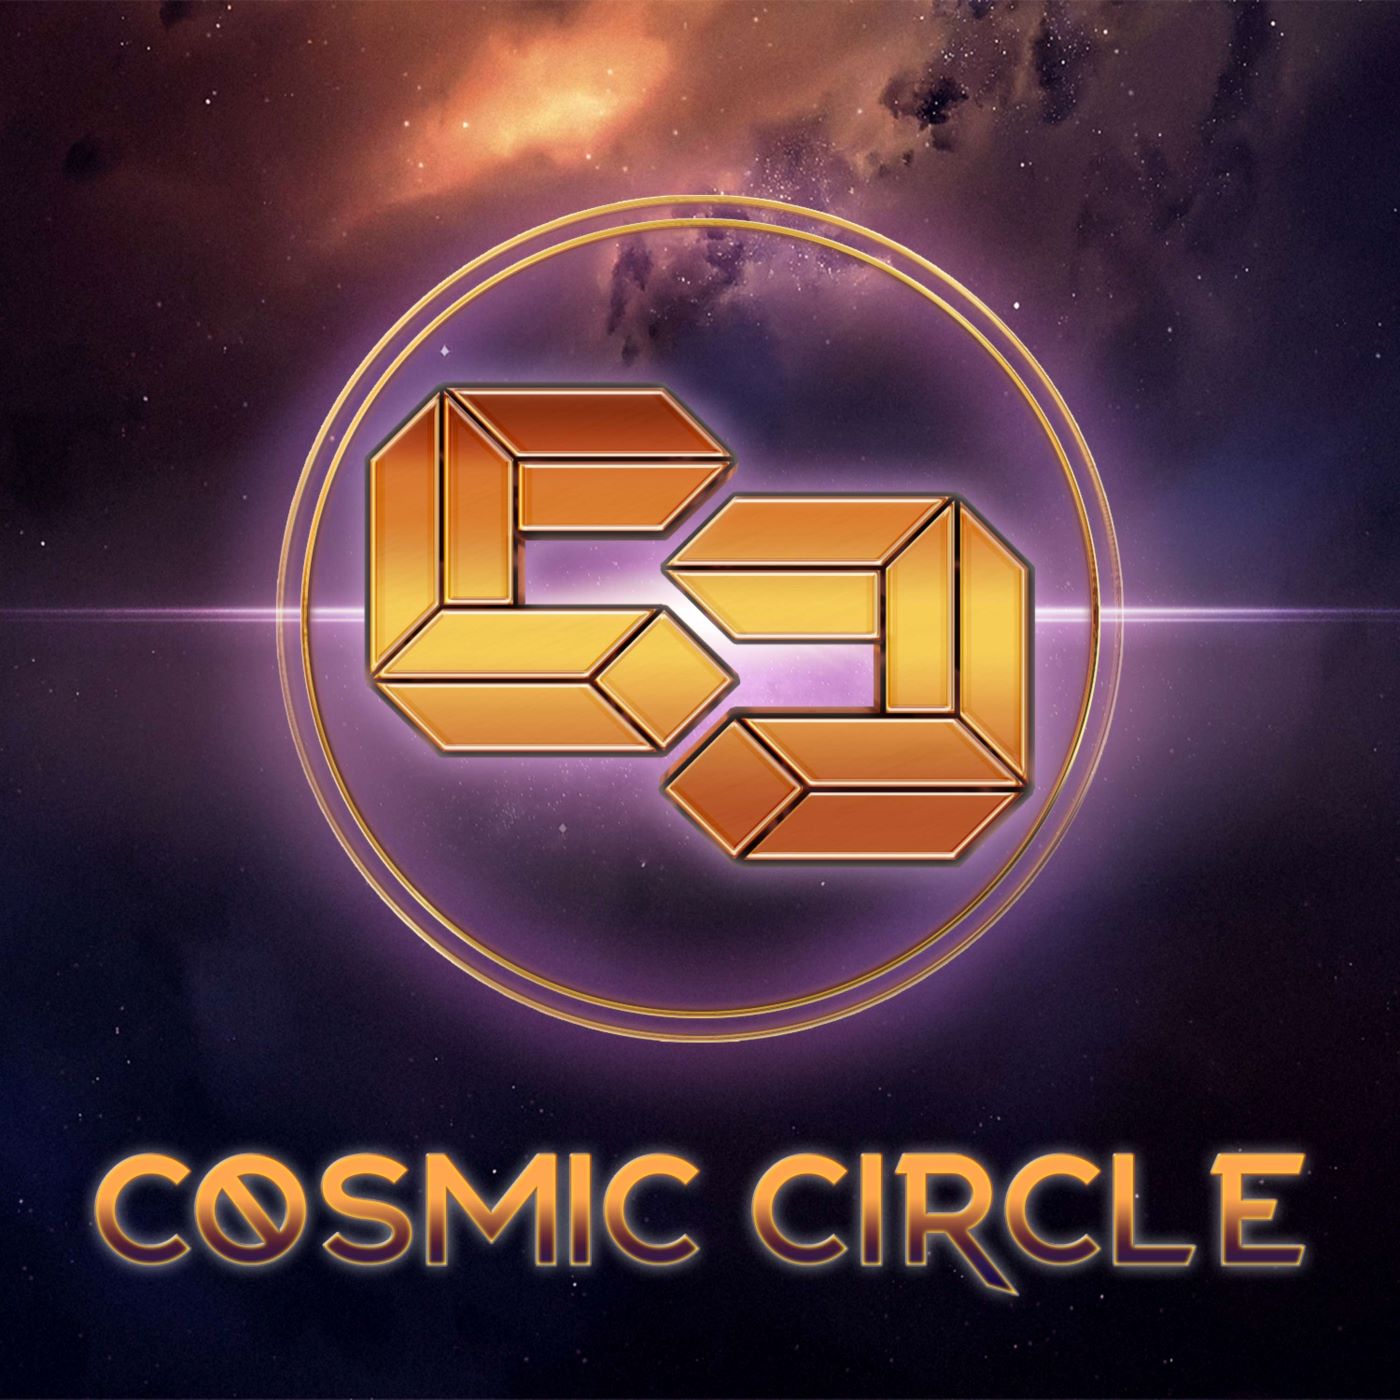 Cosmic Circle Ep. 49: Percy Jackson and the Olympians Discussion (Spoilers eps. 1-5)